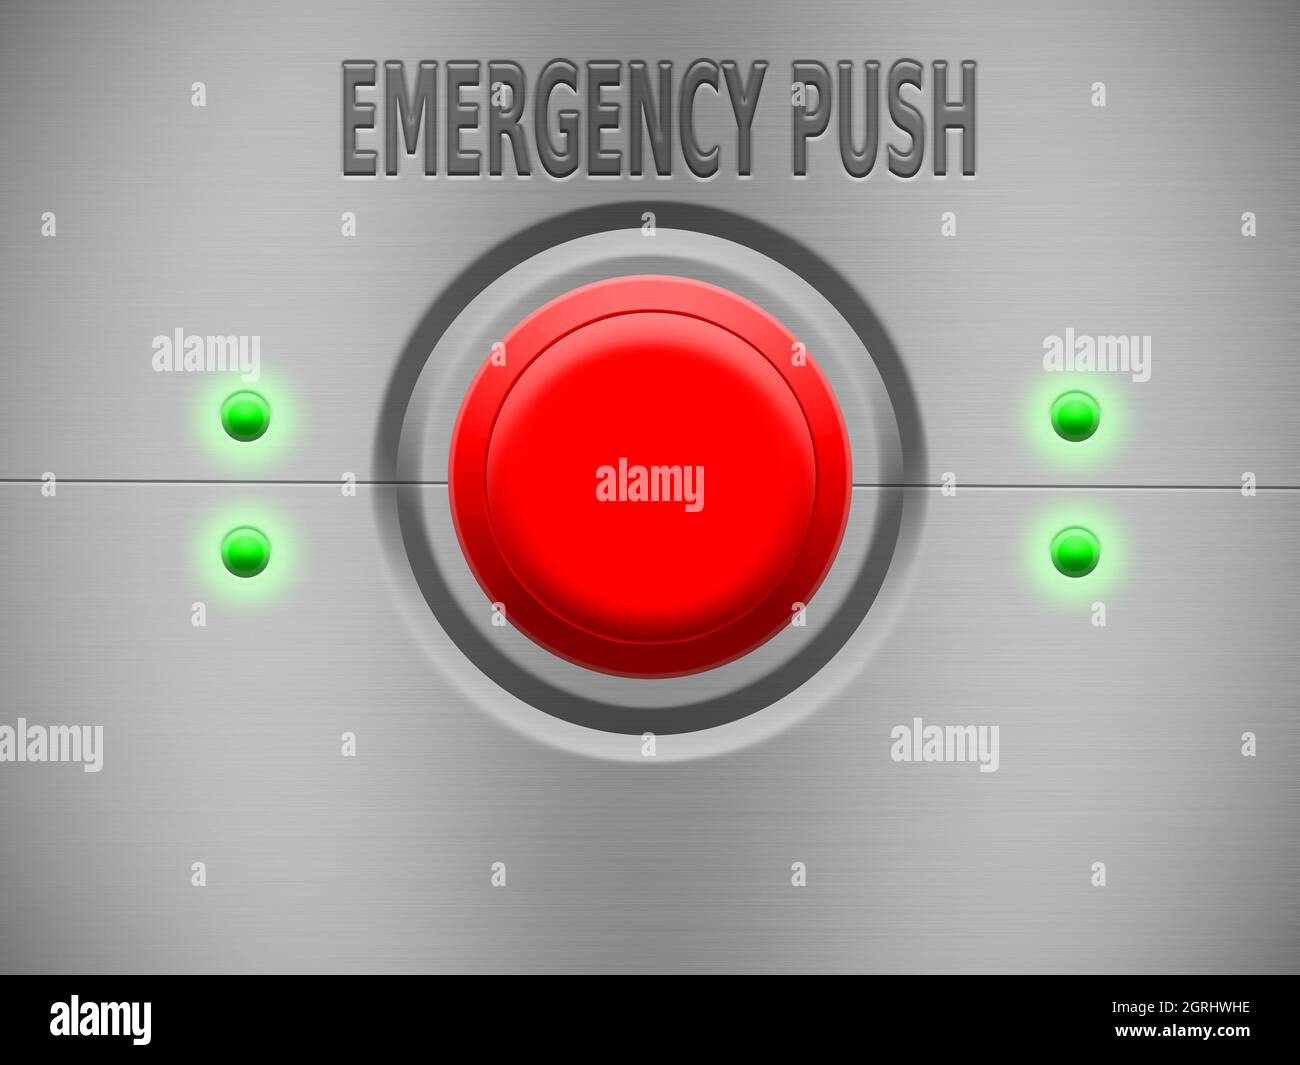 What Does the Emergency Big Red Button Do? 